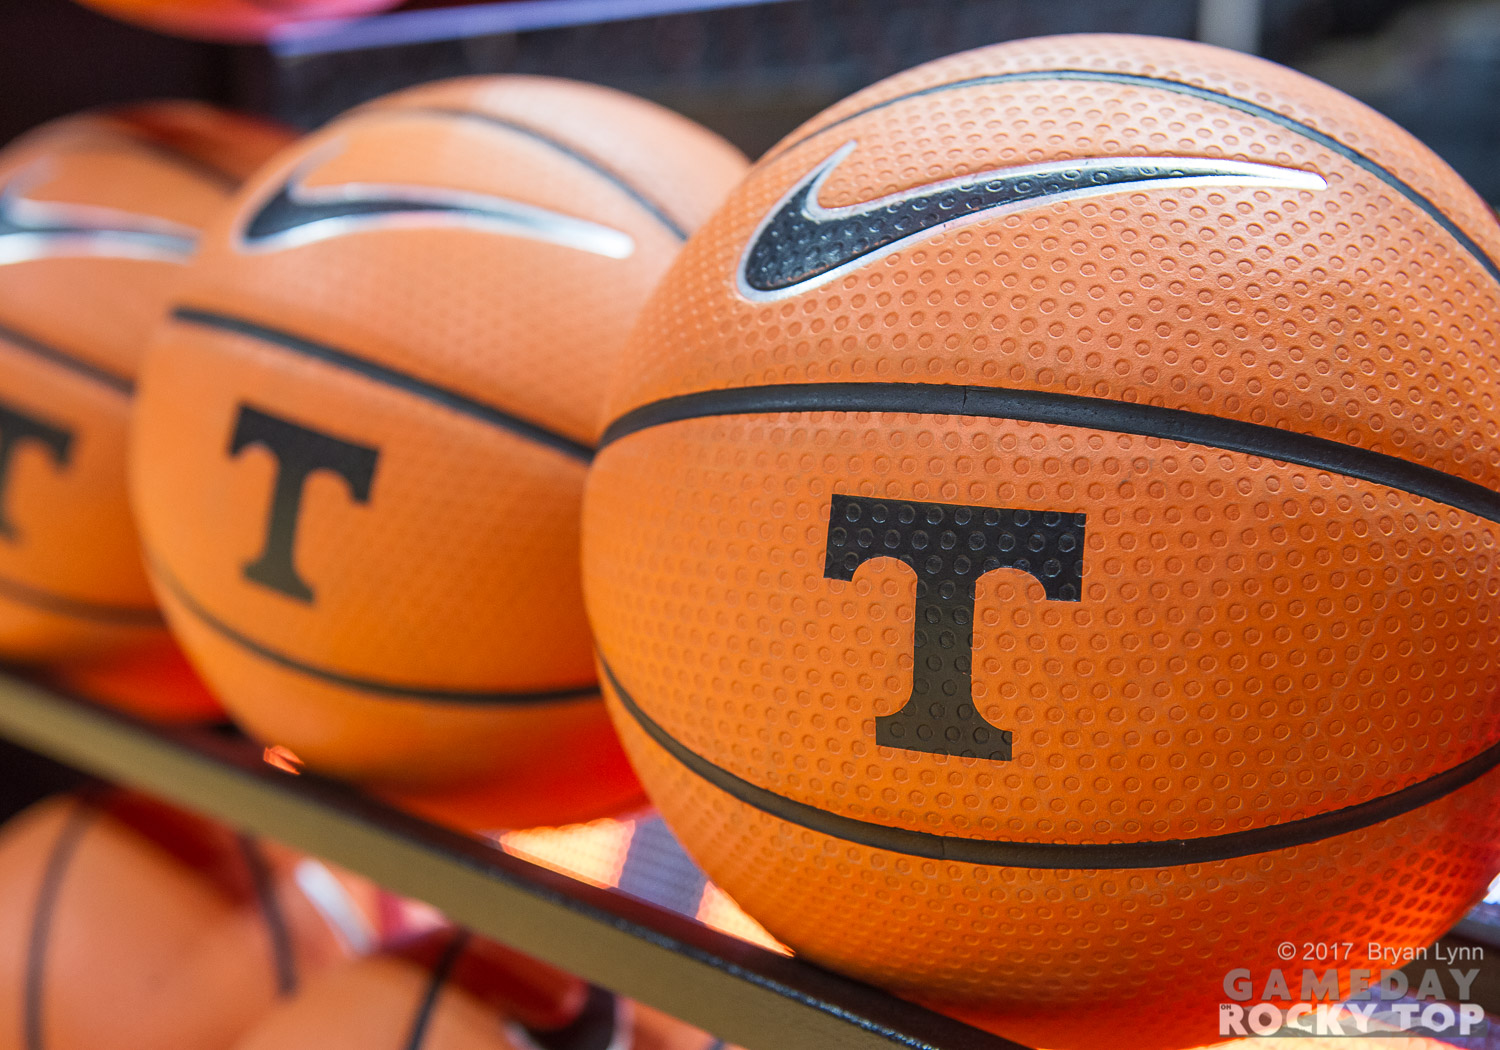 Hoops Recruiting: While Still Dancing, Tennessee Preparing for 2019 Openings